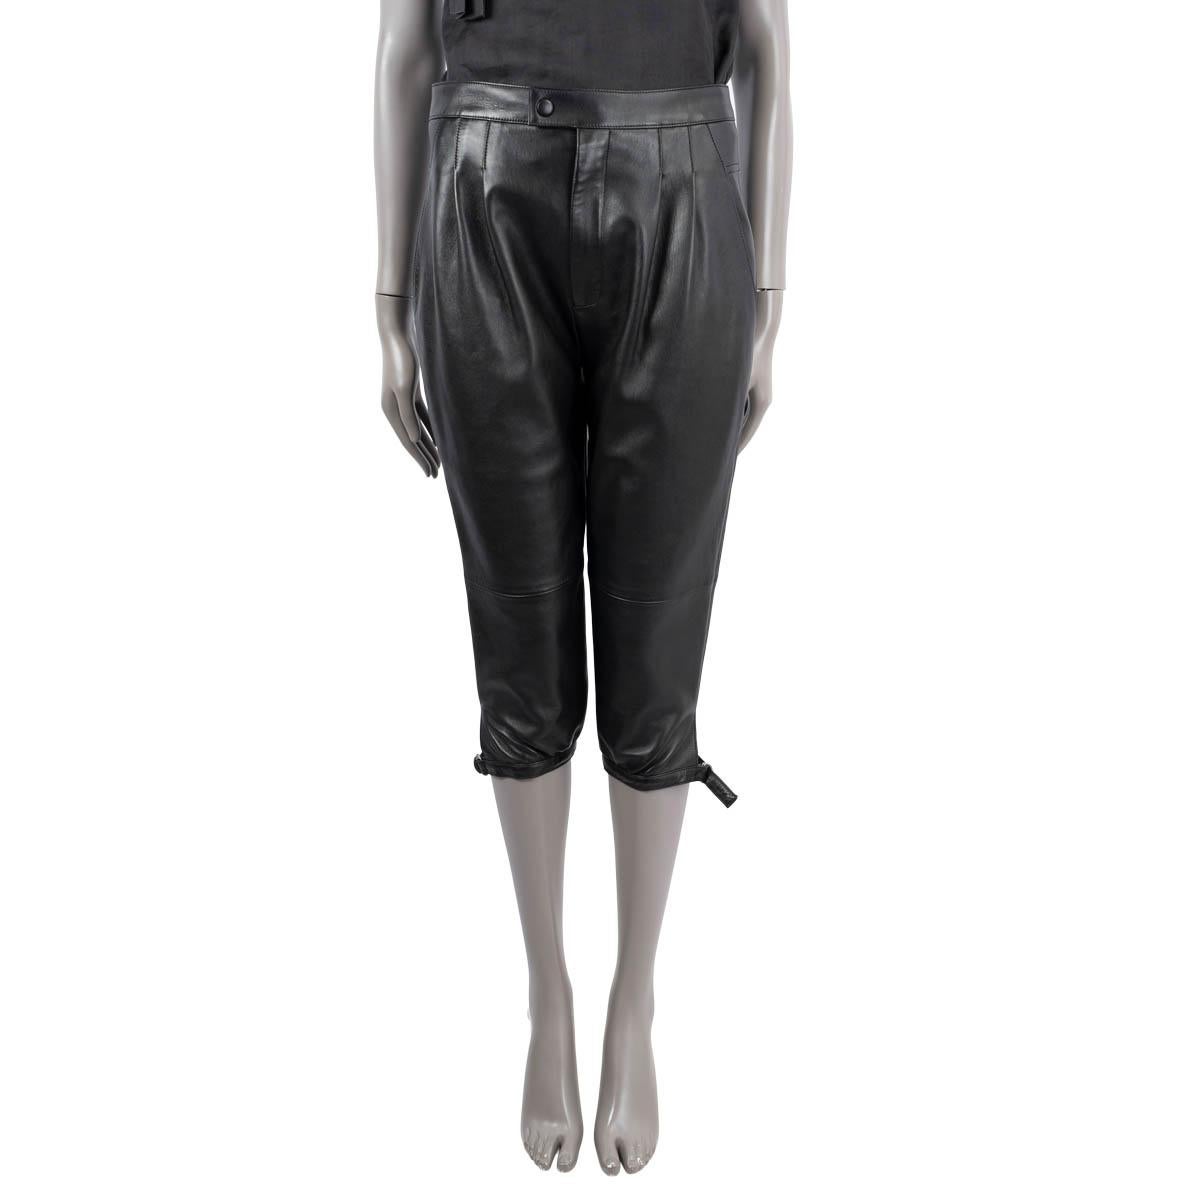 100% authentic Saint Laurent cropped leather pant in black leather (100%) with a high rise. Lined in black cupro (59%) and silk (41%). Features have two slit pockets on the front, and buckle at the ankle. Open closes with a zipper and button one